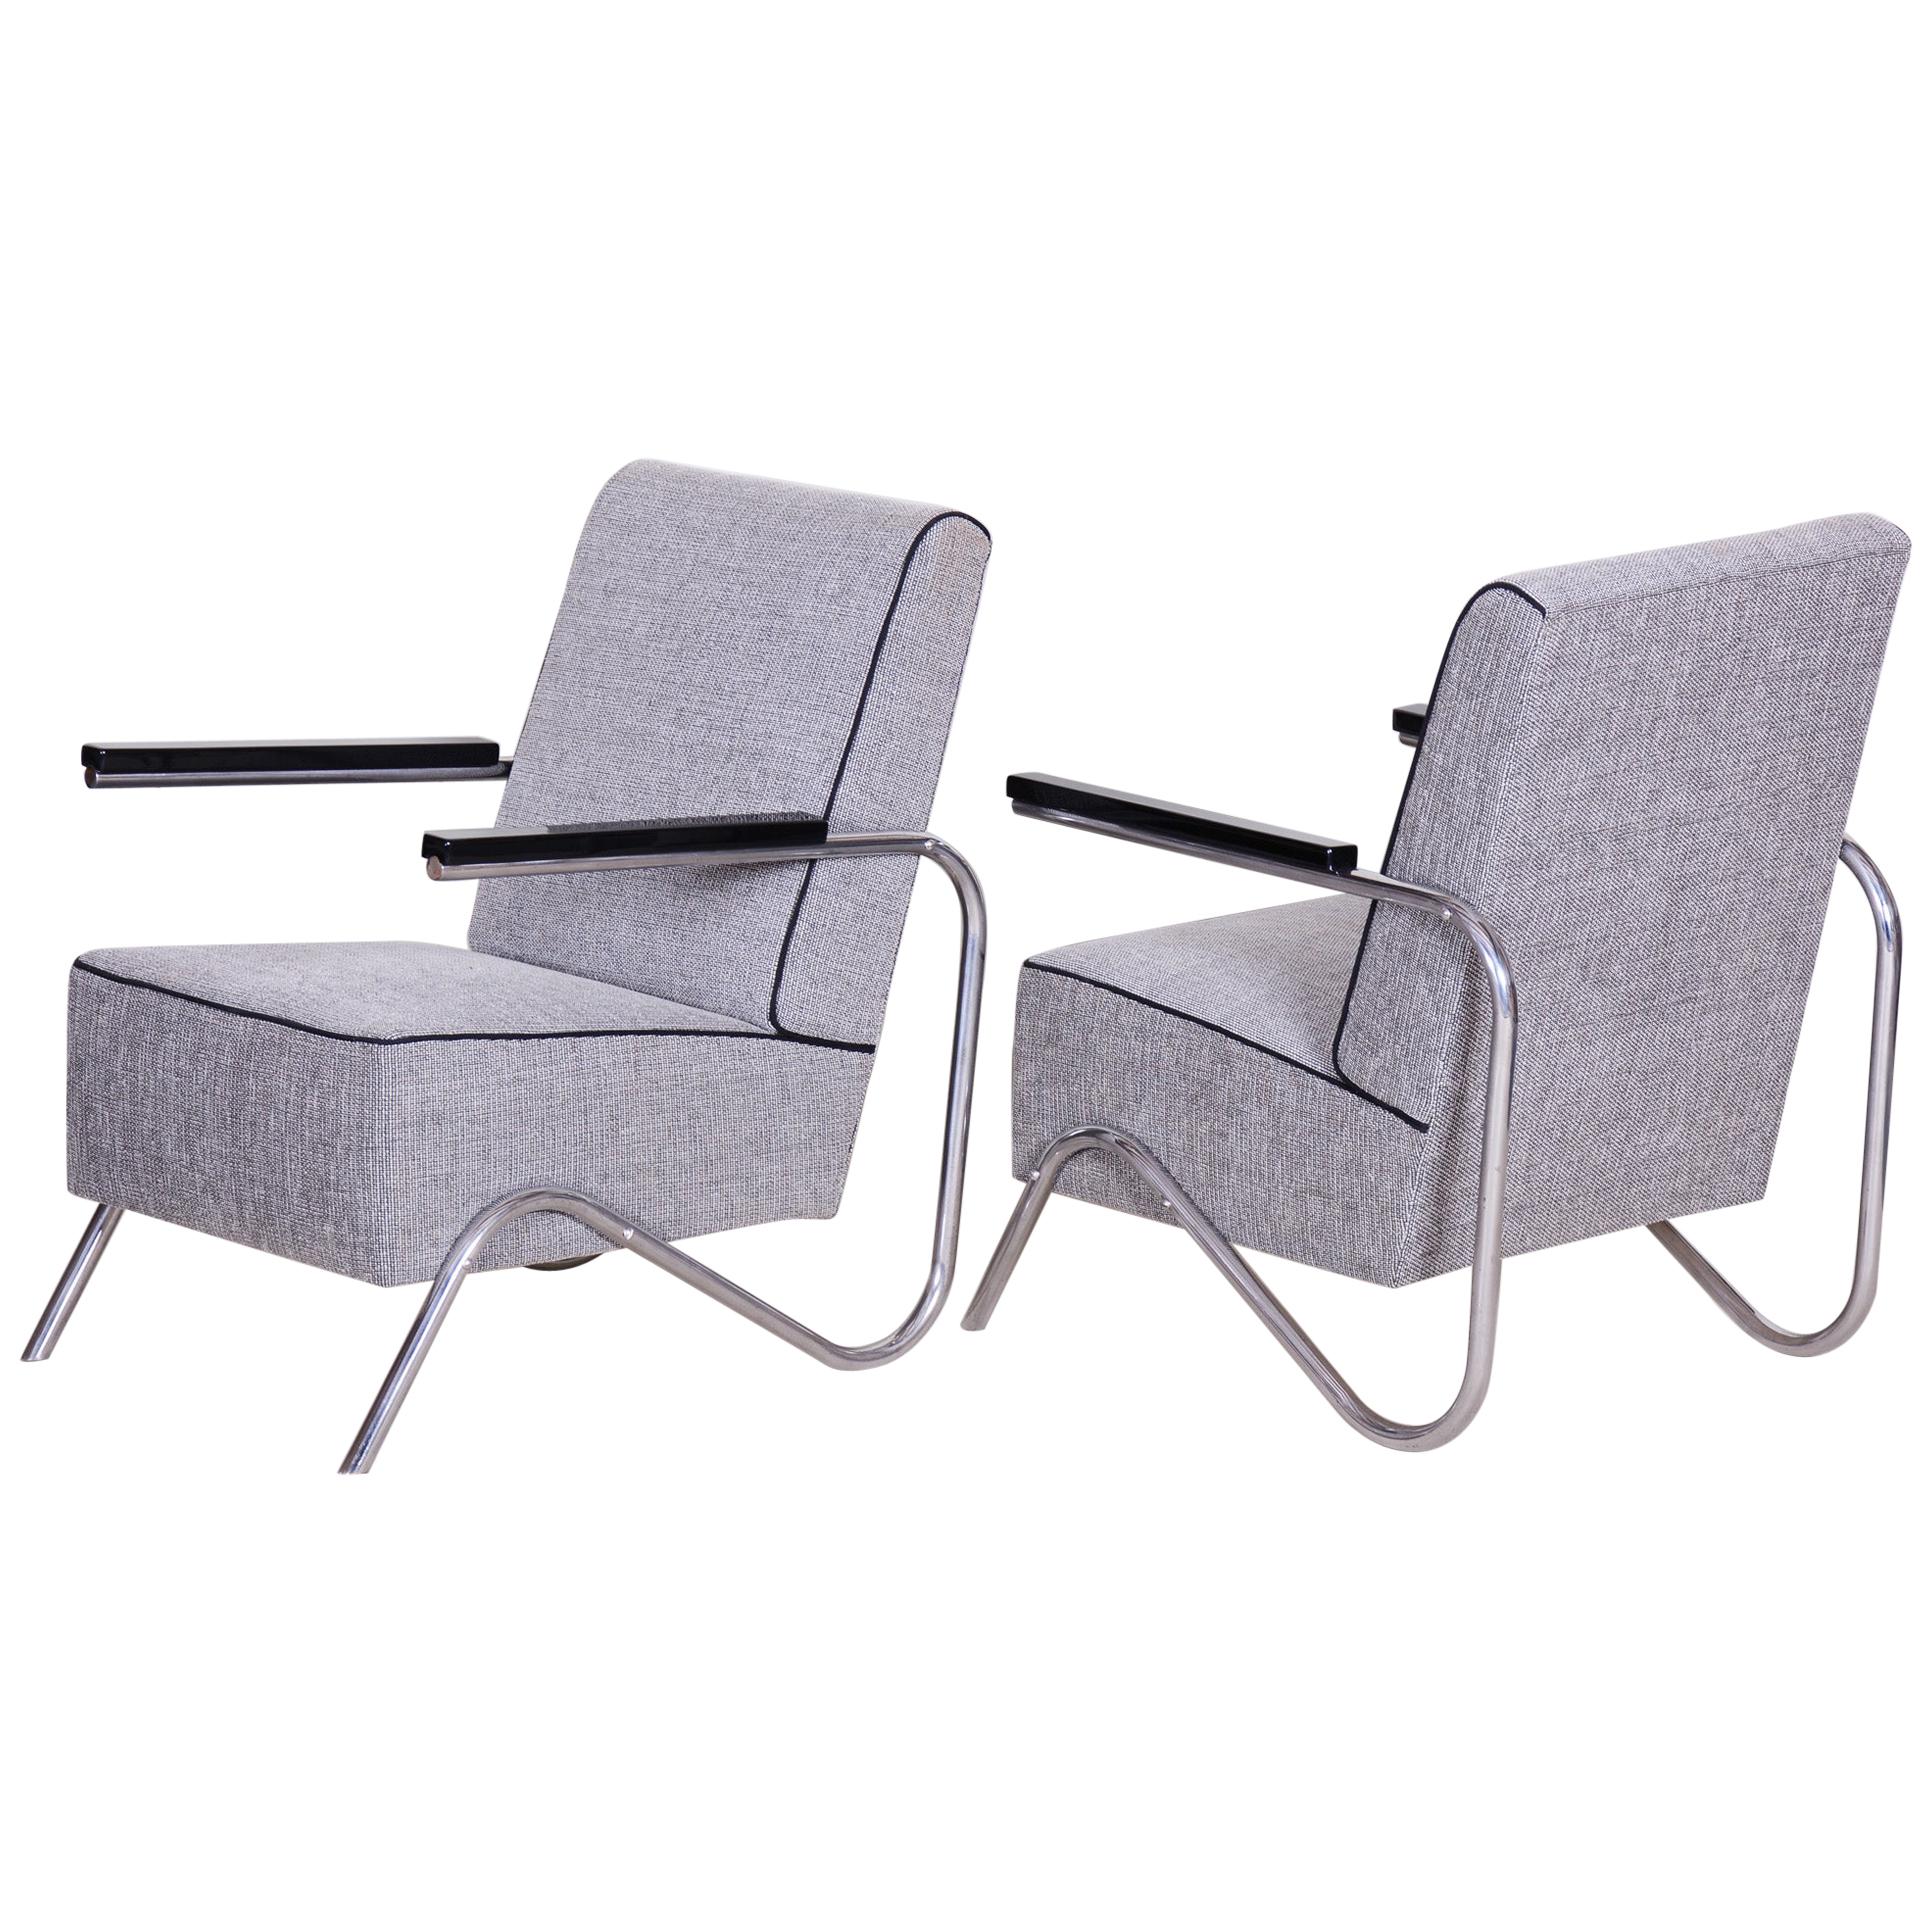 Pair of Unusual Grey Restored Tubular Chrome Armchairs, New Upholstery, 1930s